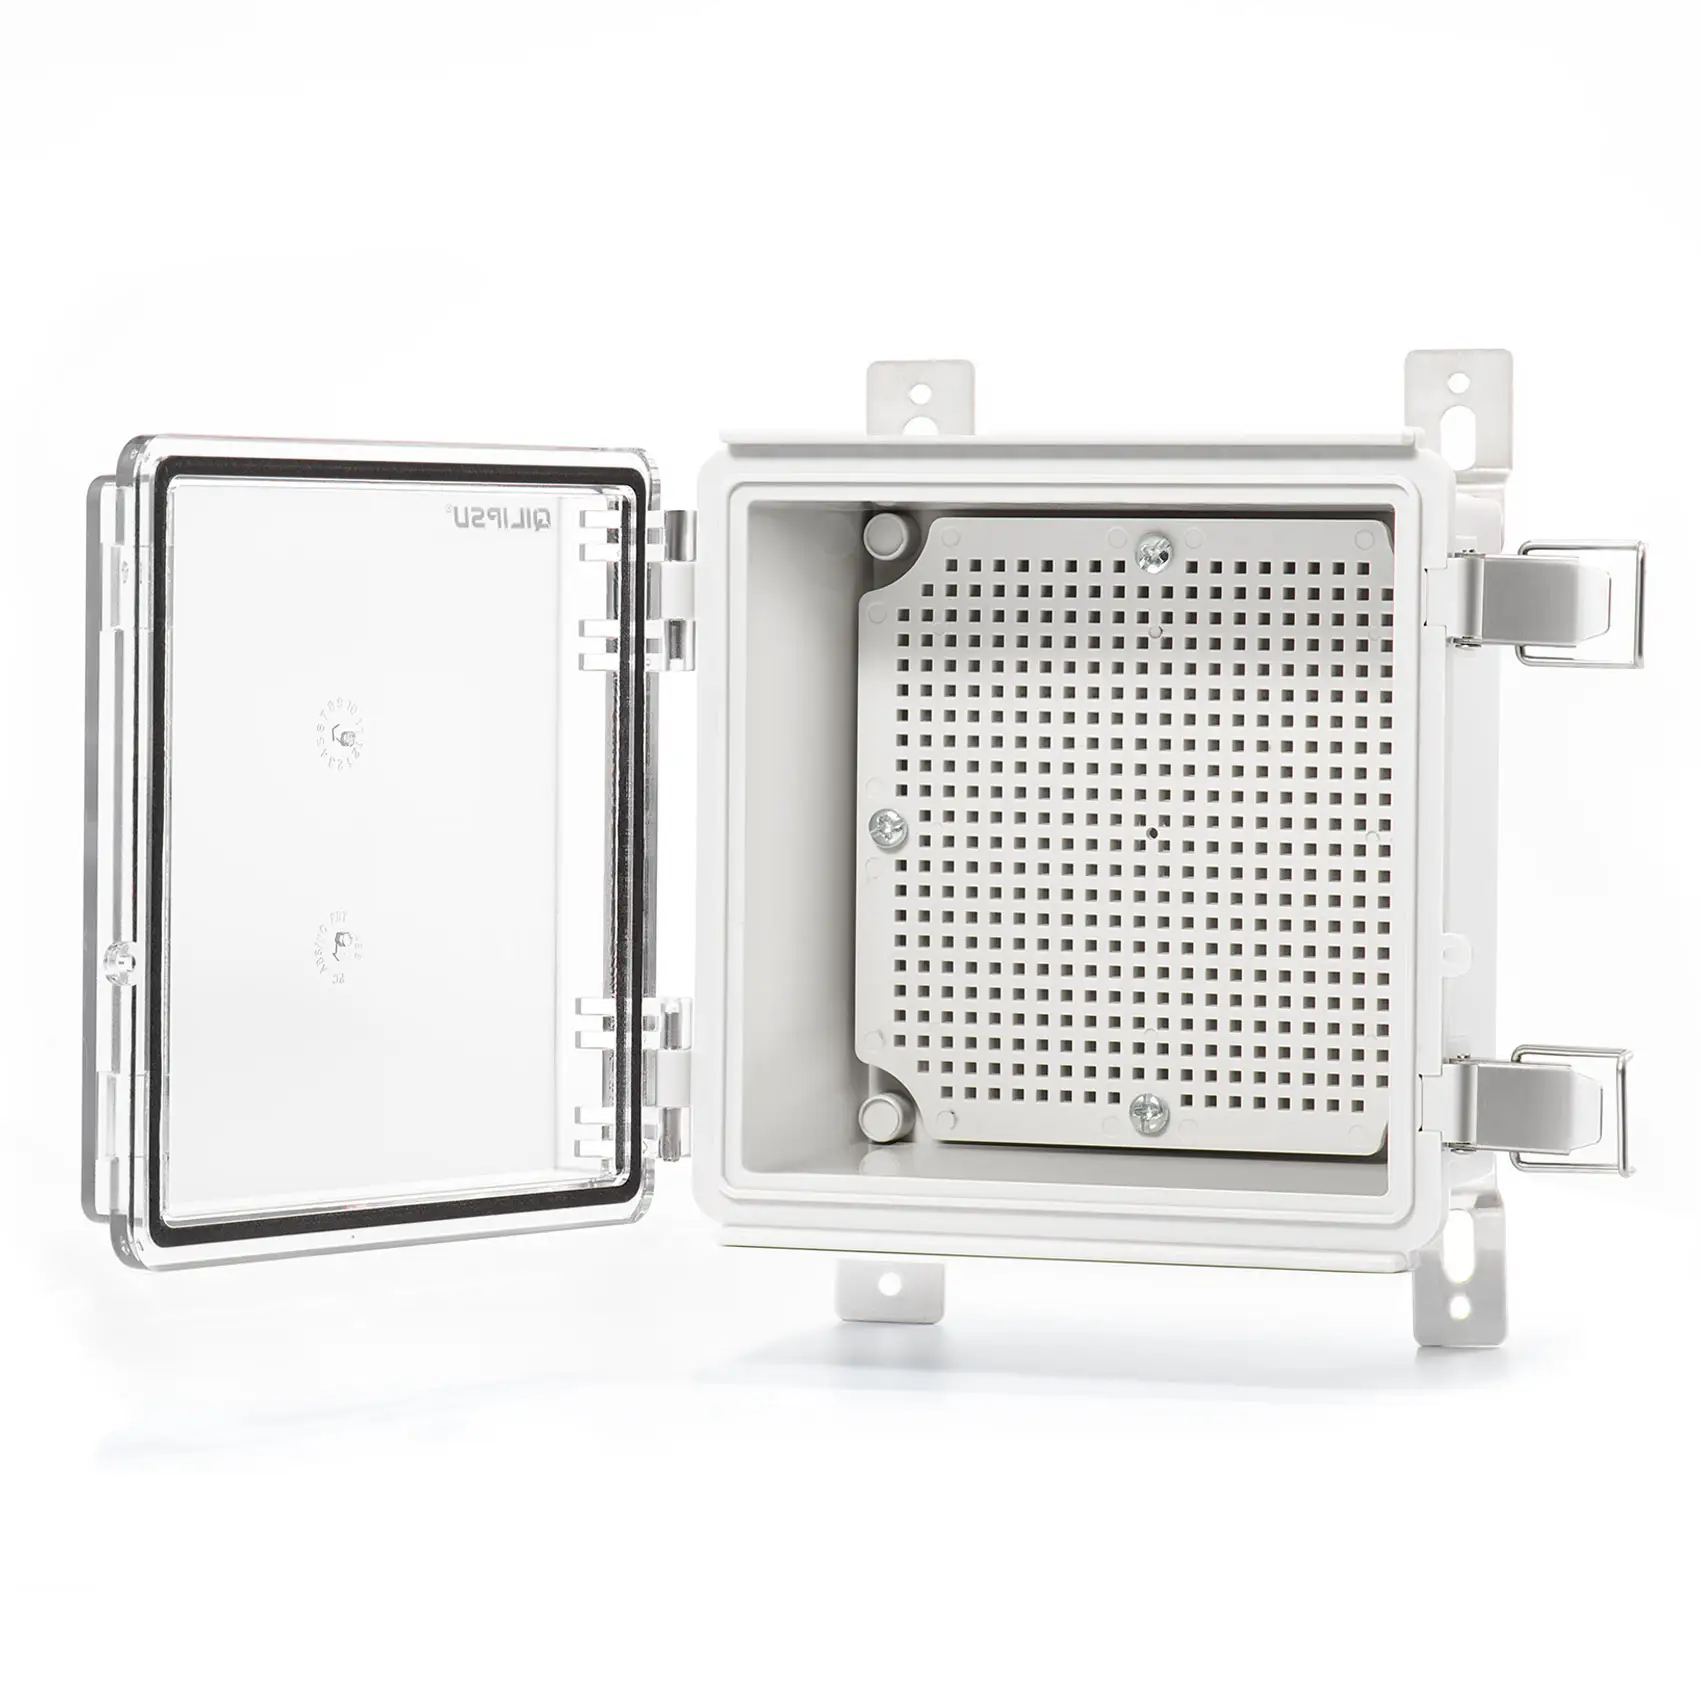 QILIPSU IP67 Waterproof Junction Box Outdoor Electrical Box ABS Plastic Enclosure Hinged Clear Door for Proejcts 5.9"x5.9"x3.5"